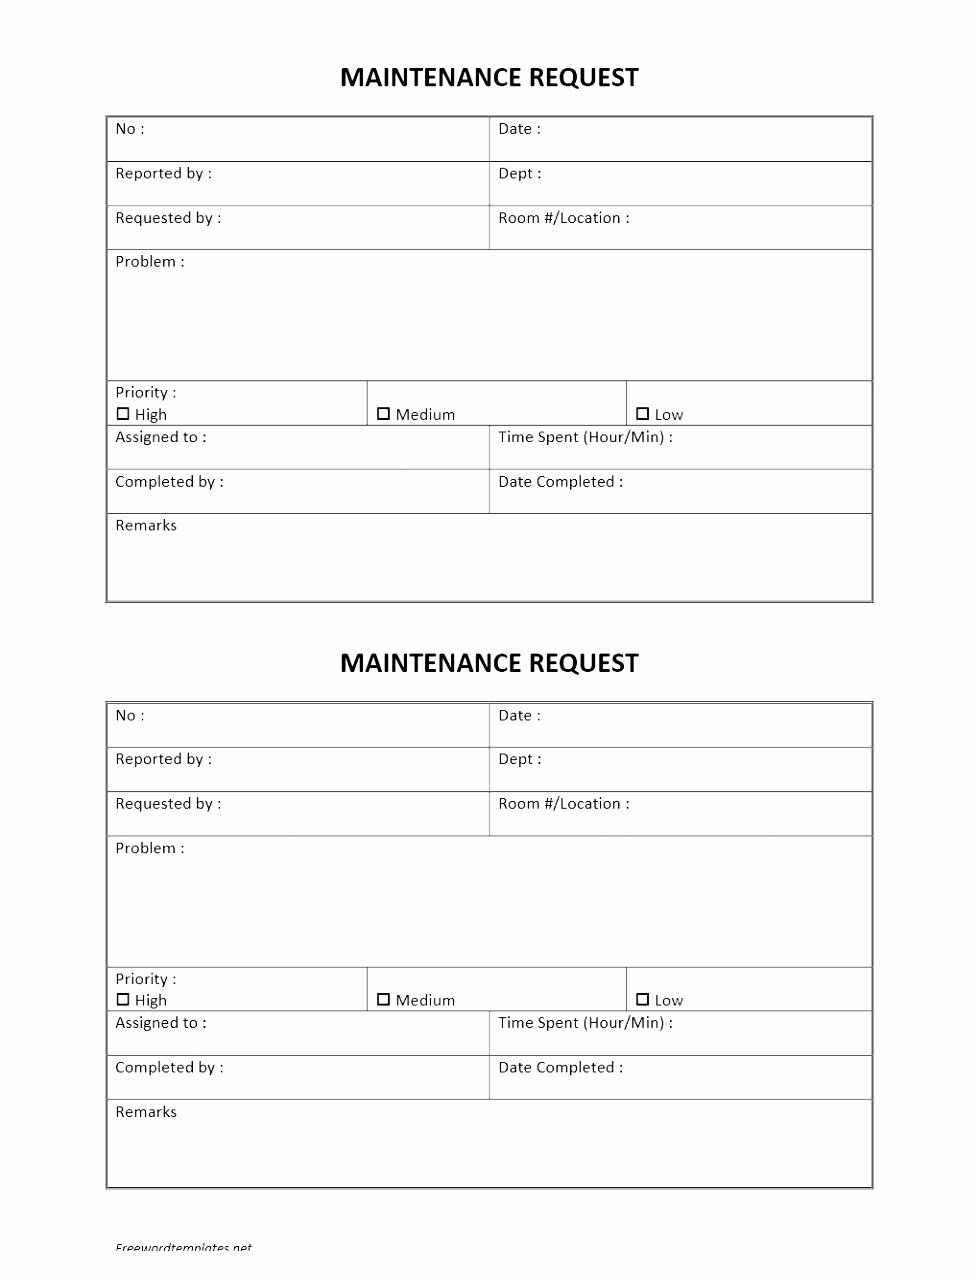 Marketing Project Request form Template Awesome 5 Hotel Check In form Template Uerrw